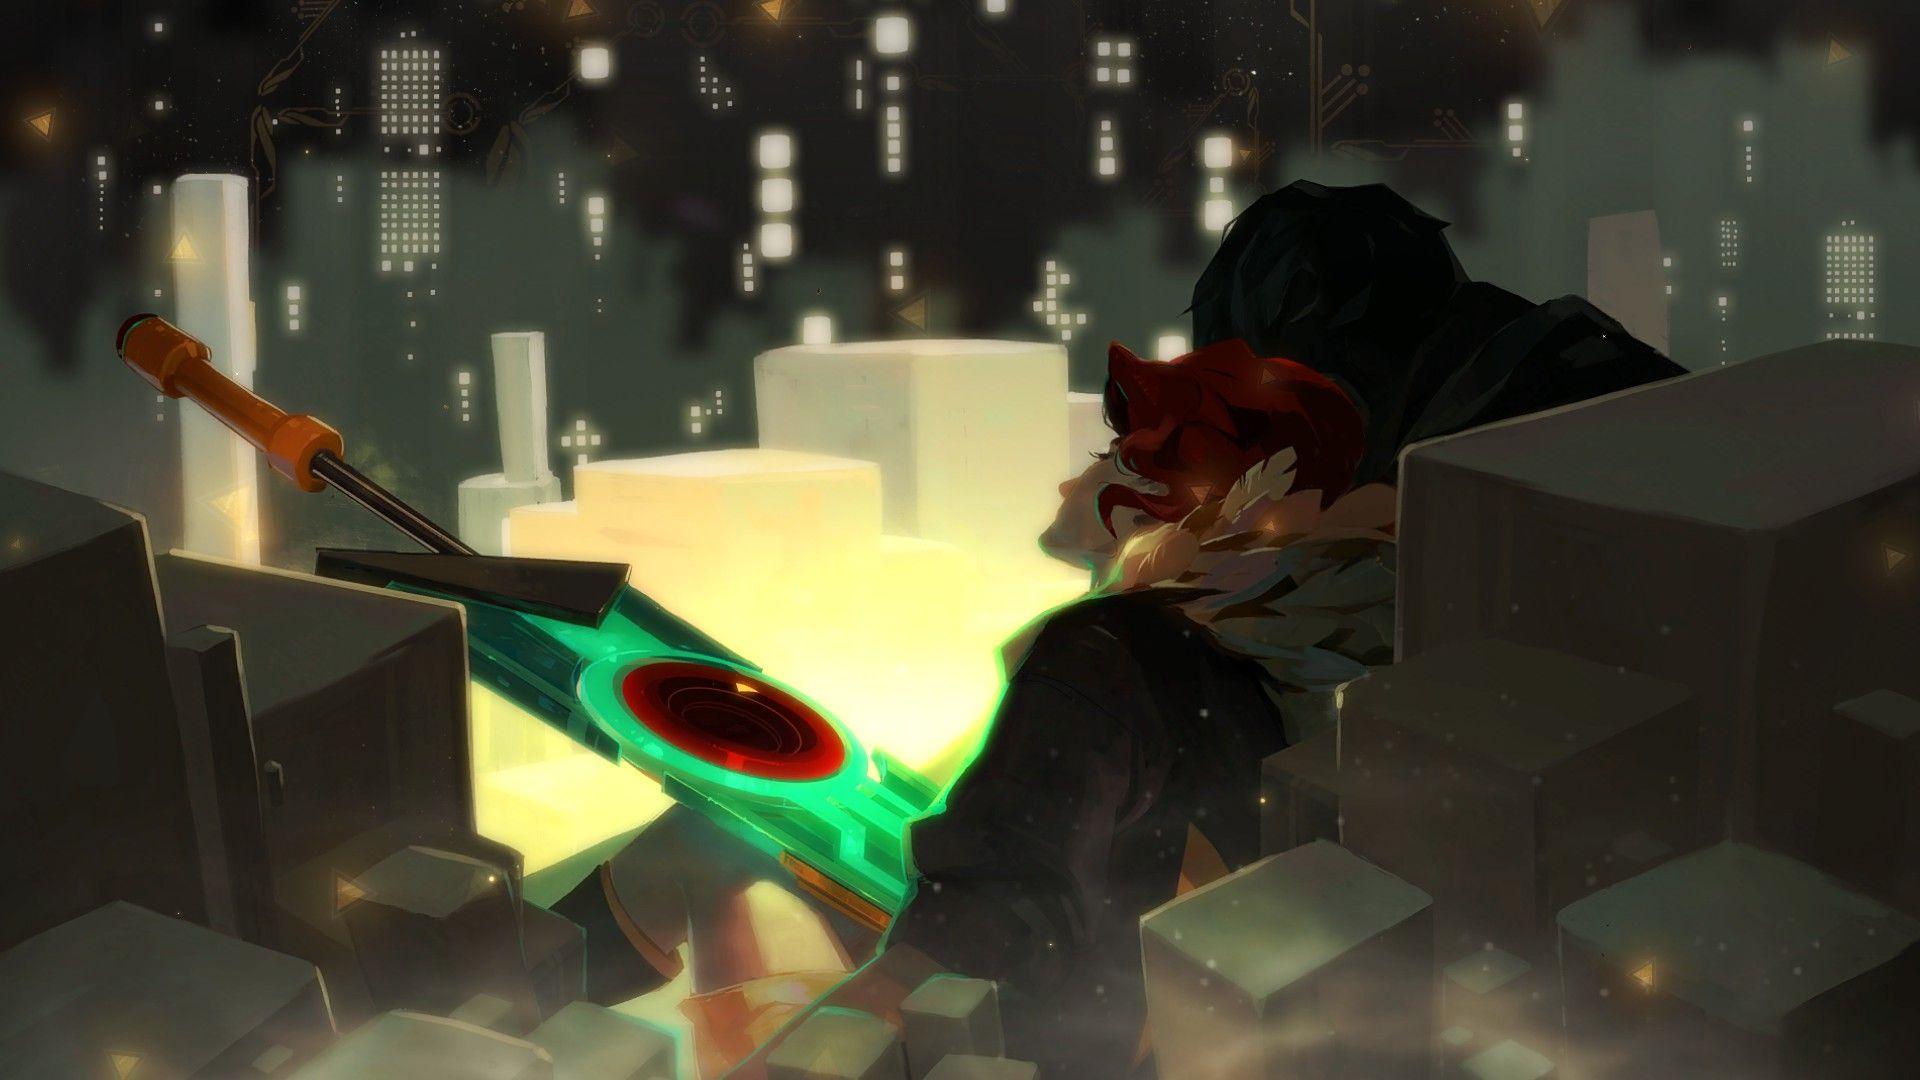 Transistor Wallpaper, Full HDQ Transistor Picture and Wallpaper